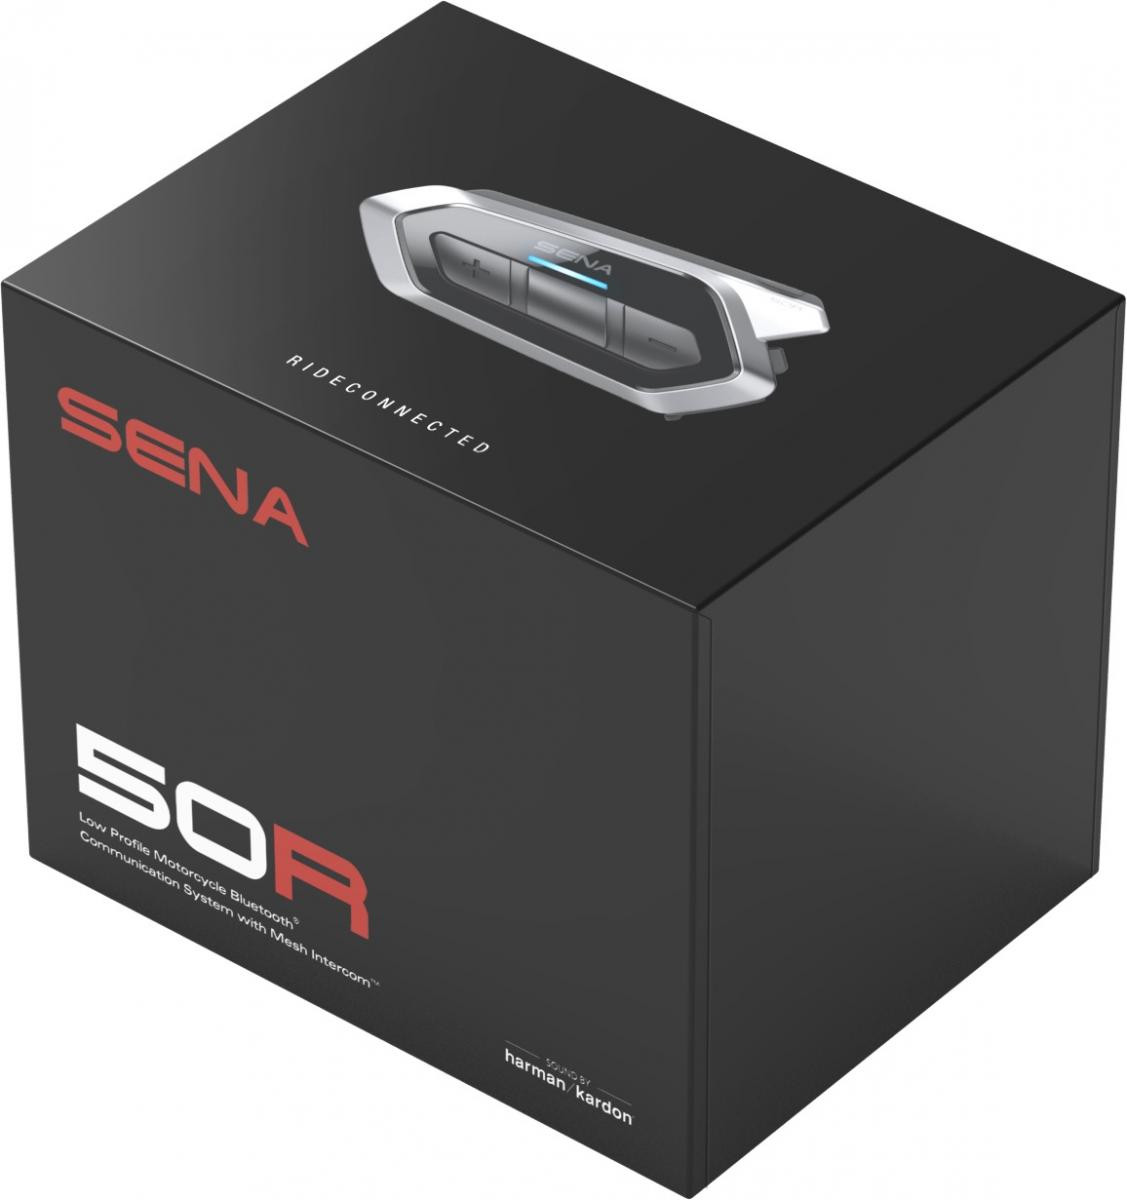 Sena 50S Motorcycle Bluetooth / Mesh Communication System with SOUND BY Harman Kardon Speakers and Mic